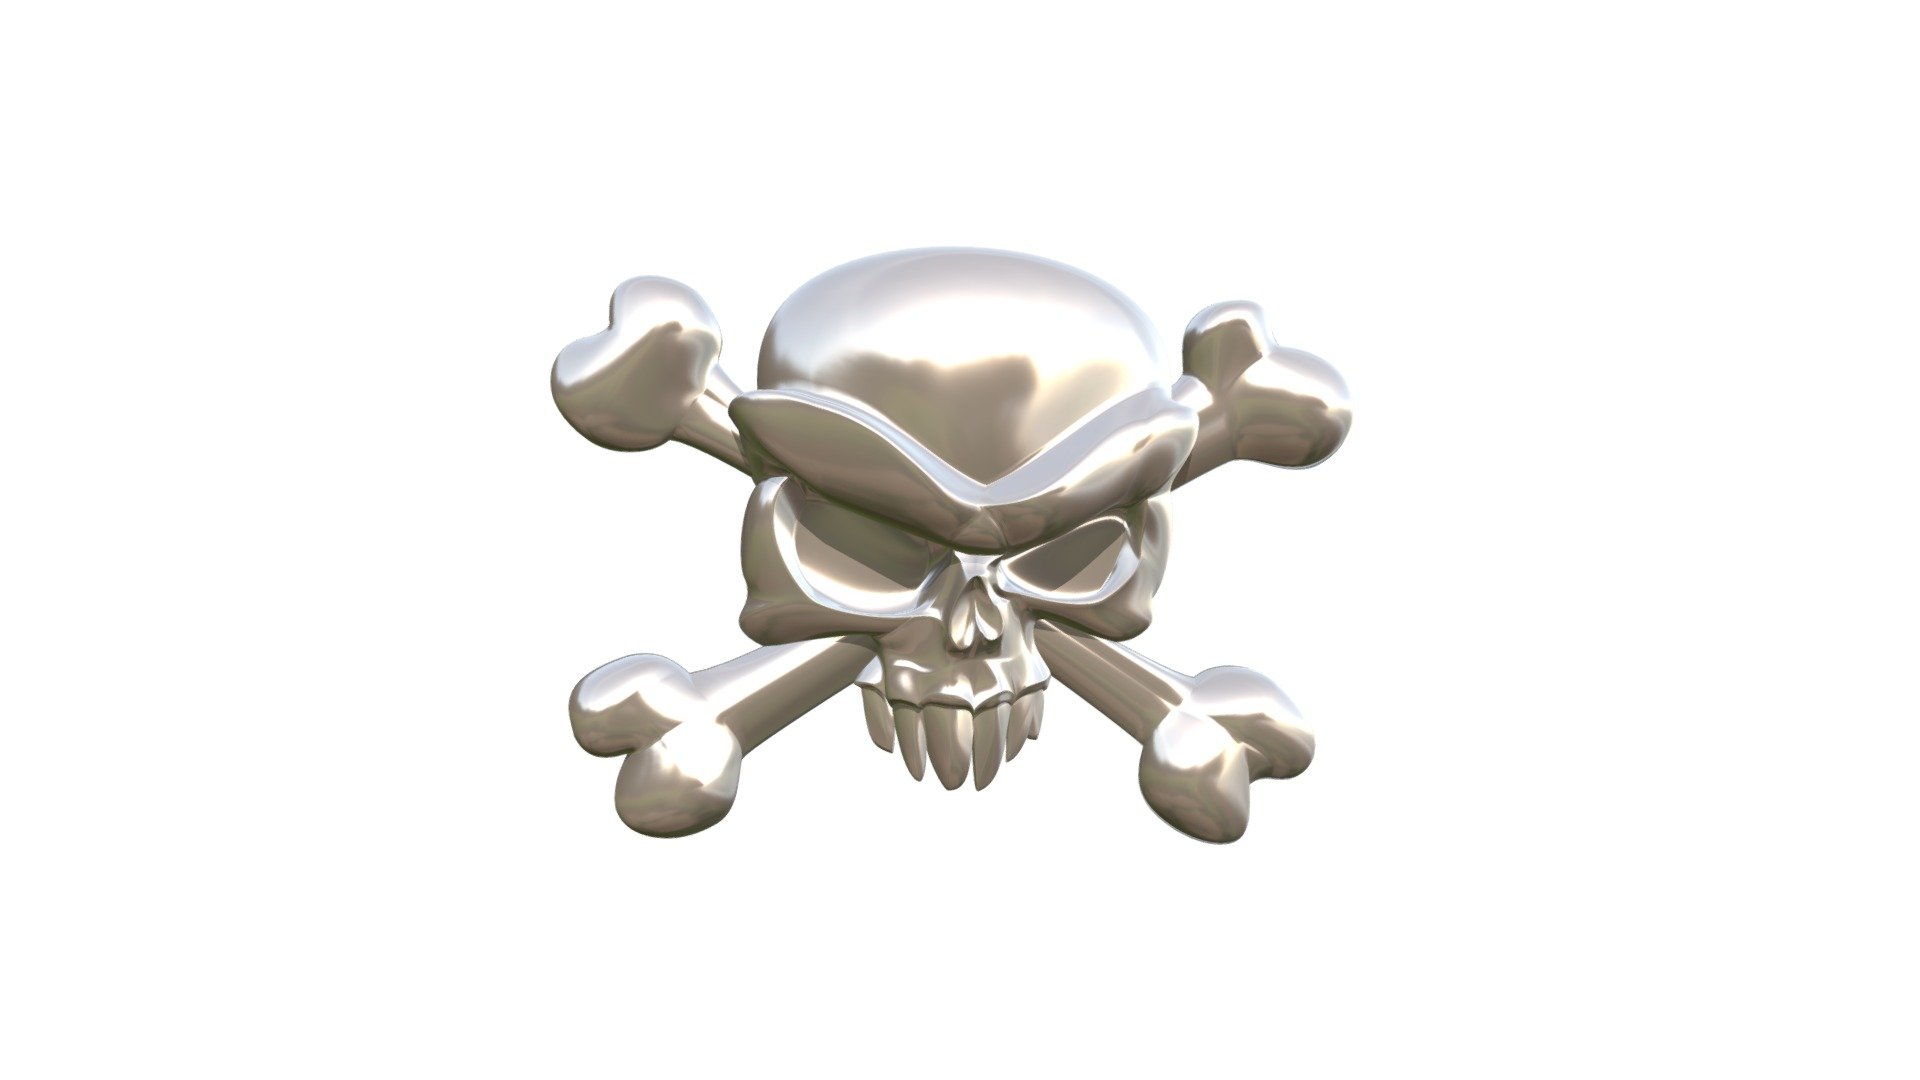 Highpoly skull, ready for 3D-print and go to abordage! Size: 48 x 10 x 35 mm. Volume: 3,9 cm3 3d model